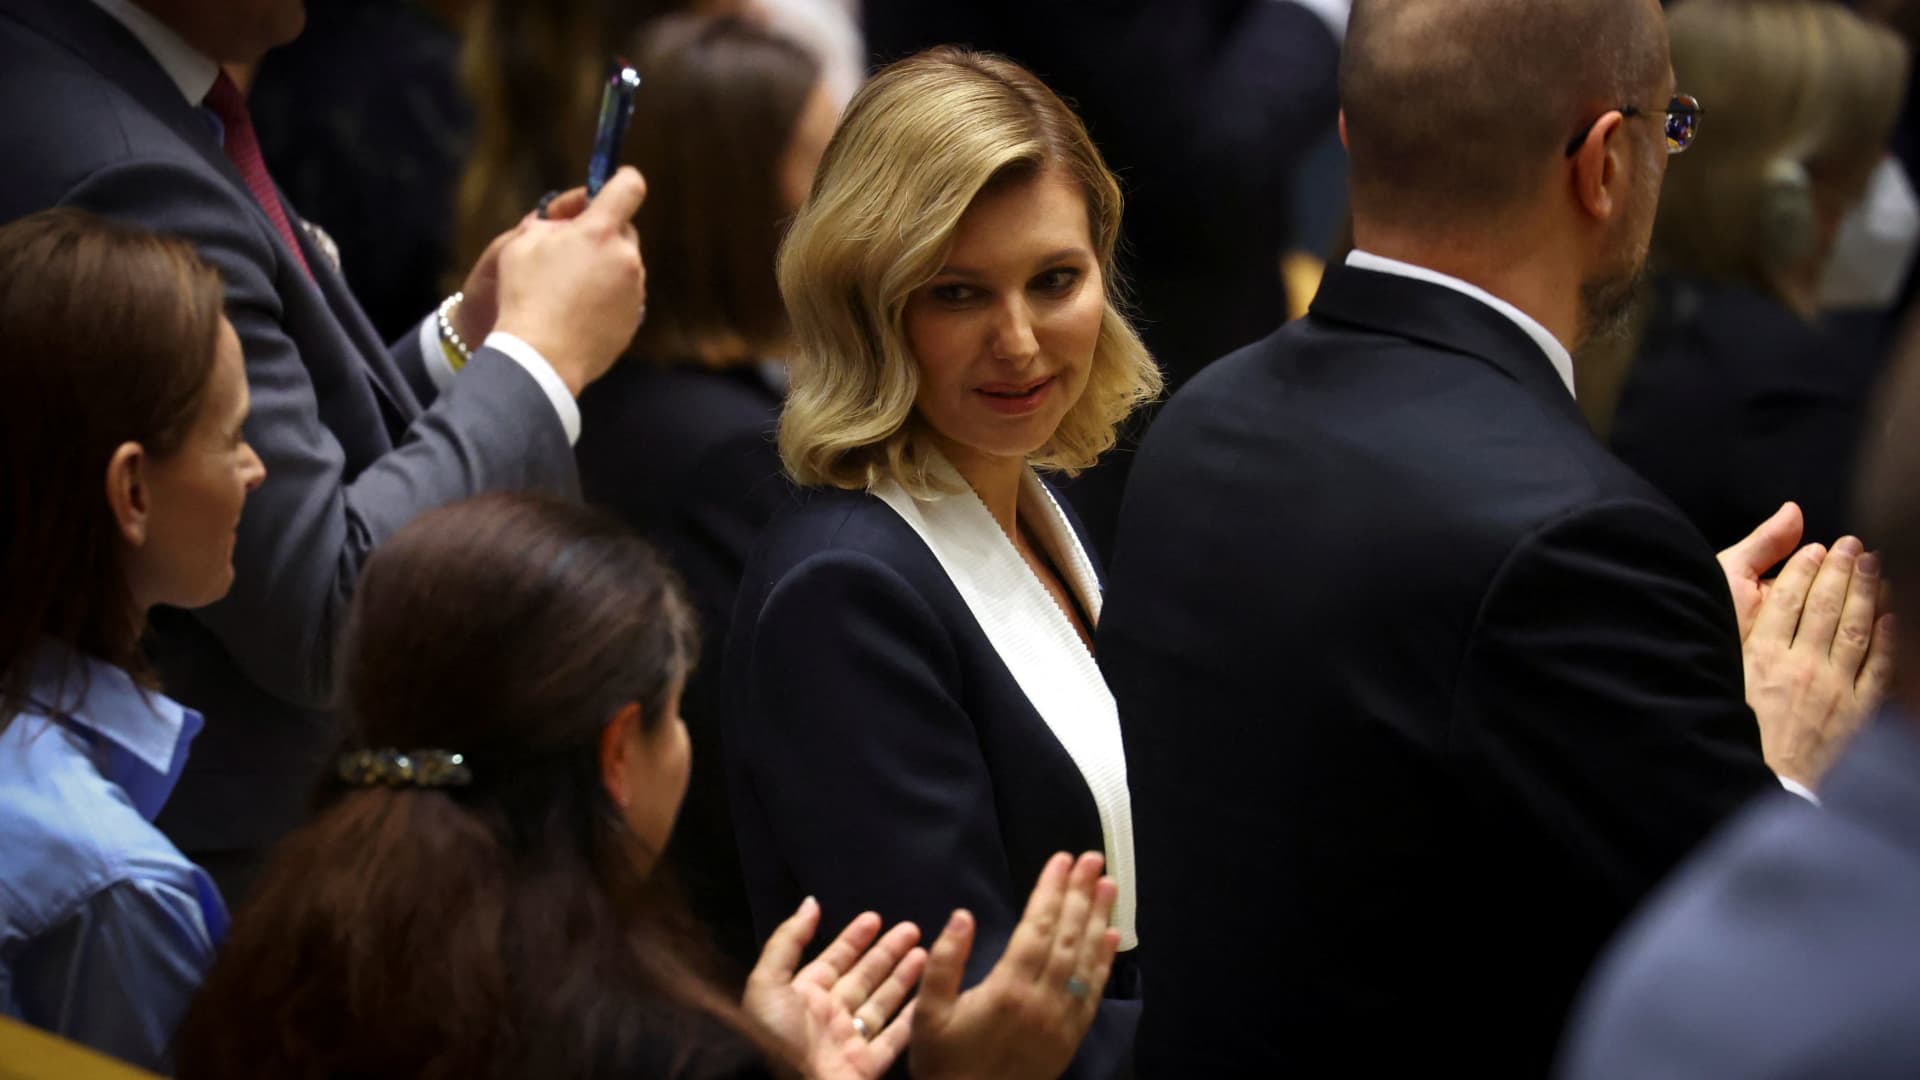 Ukraine’s first lady Olena Zelenska smiles during a standing ovation following Ukraine’s President Volodymyr Zelenski's address via a video during the 77th Session of the United Nations General Assembly at U.N. Headquarters in New York City, September 21, 2022.